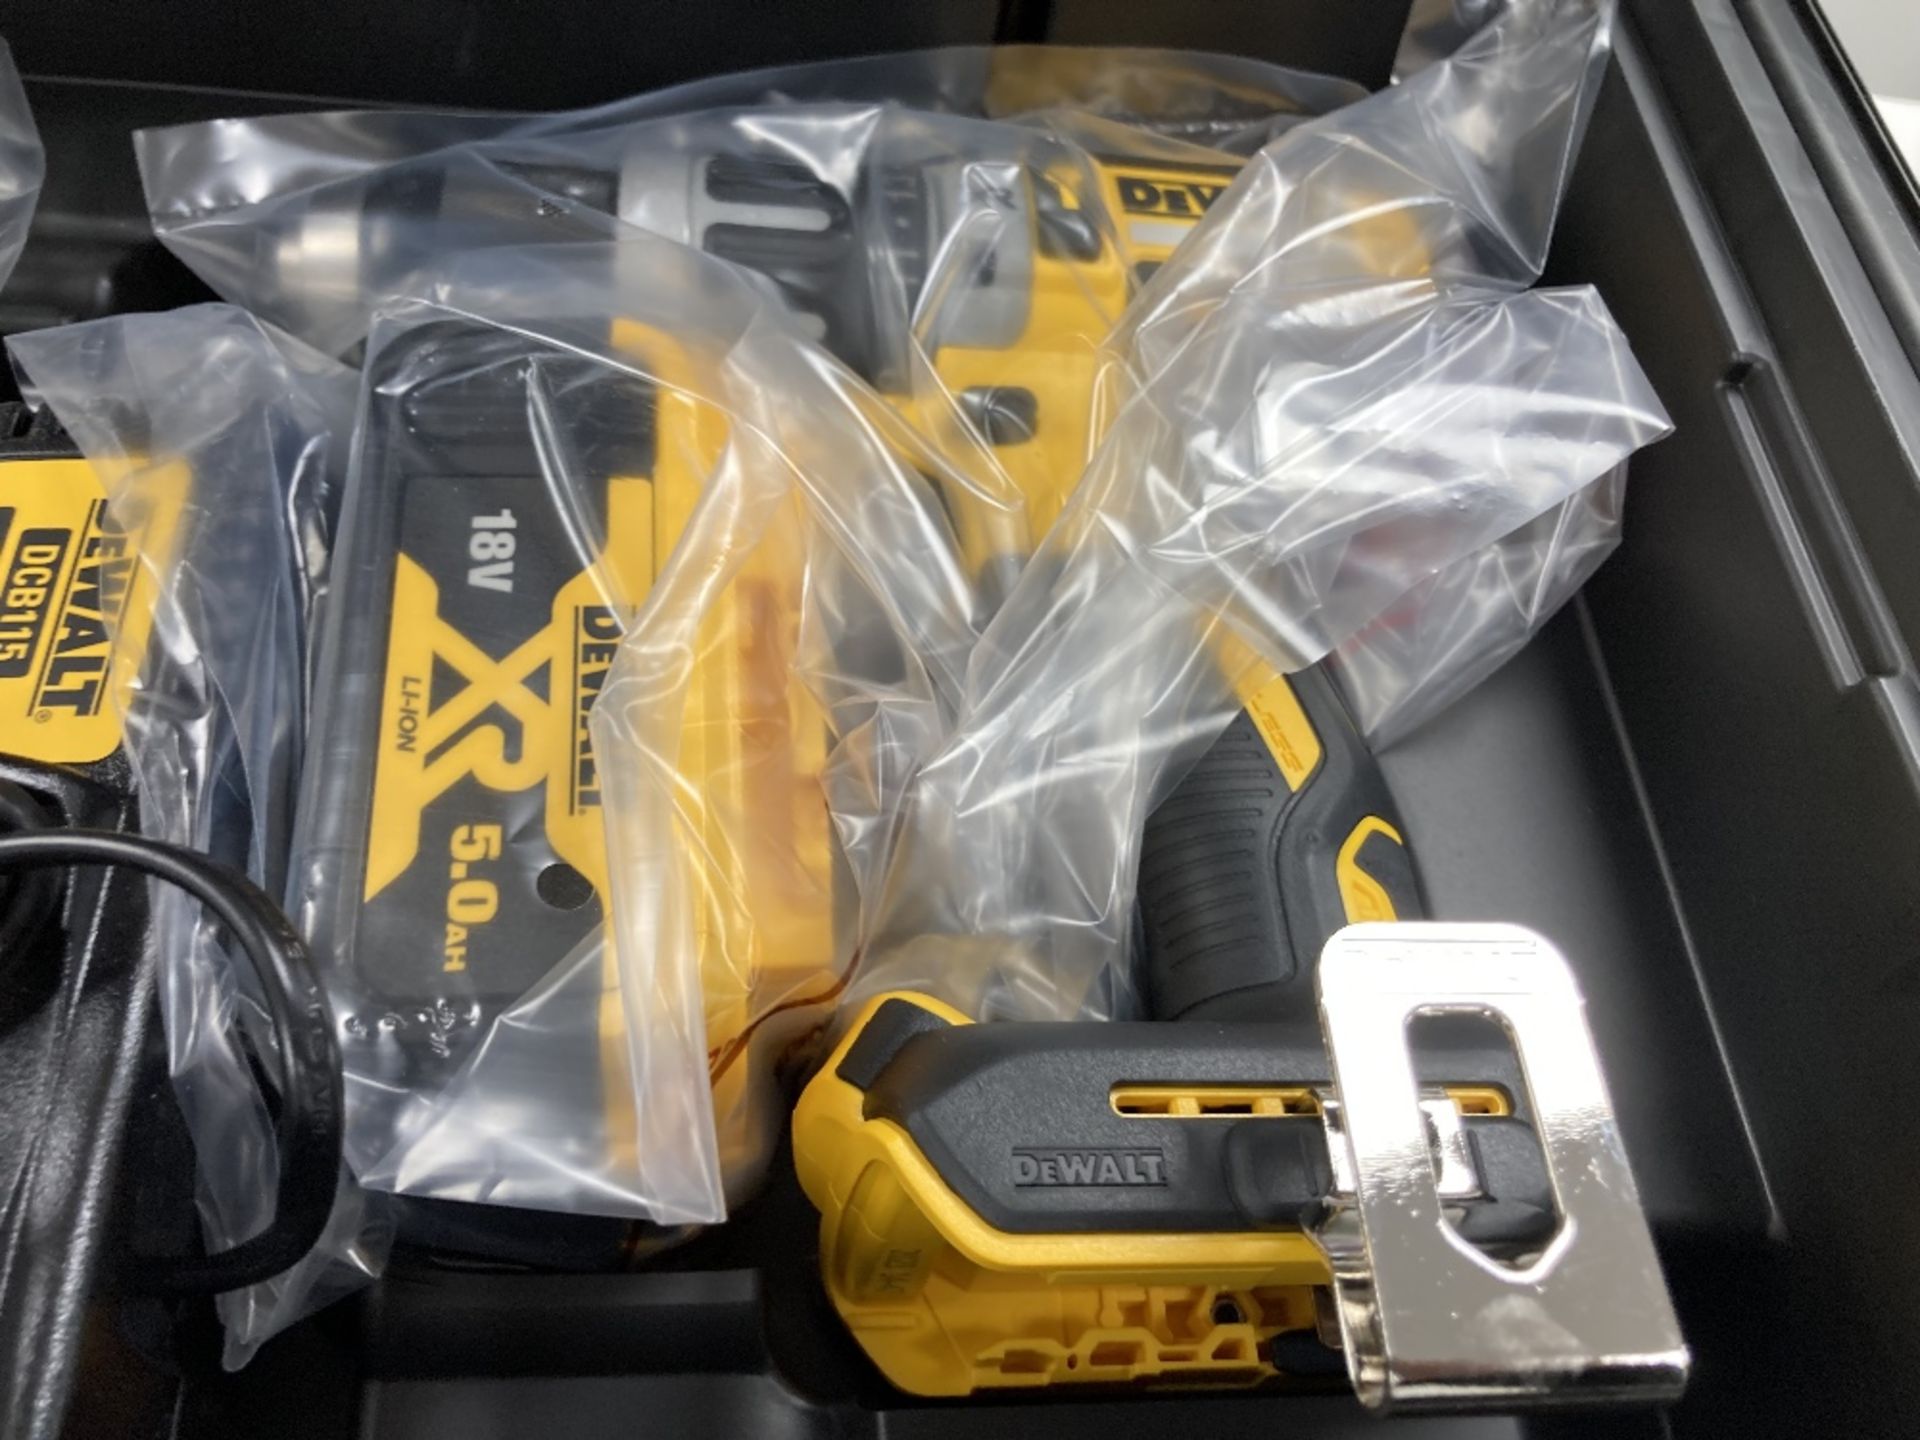 DeWalt DCK266P2-GB 18V XR Brushless Combi Drill & Impact Driver Twin Kit with 2x 5.0Ah Batteries - Image 4 of 7